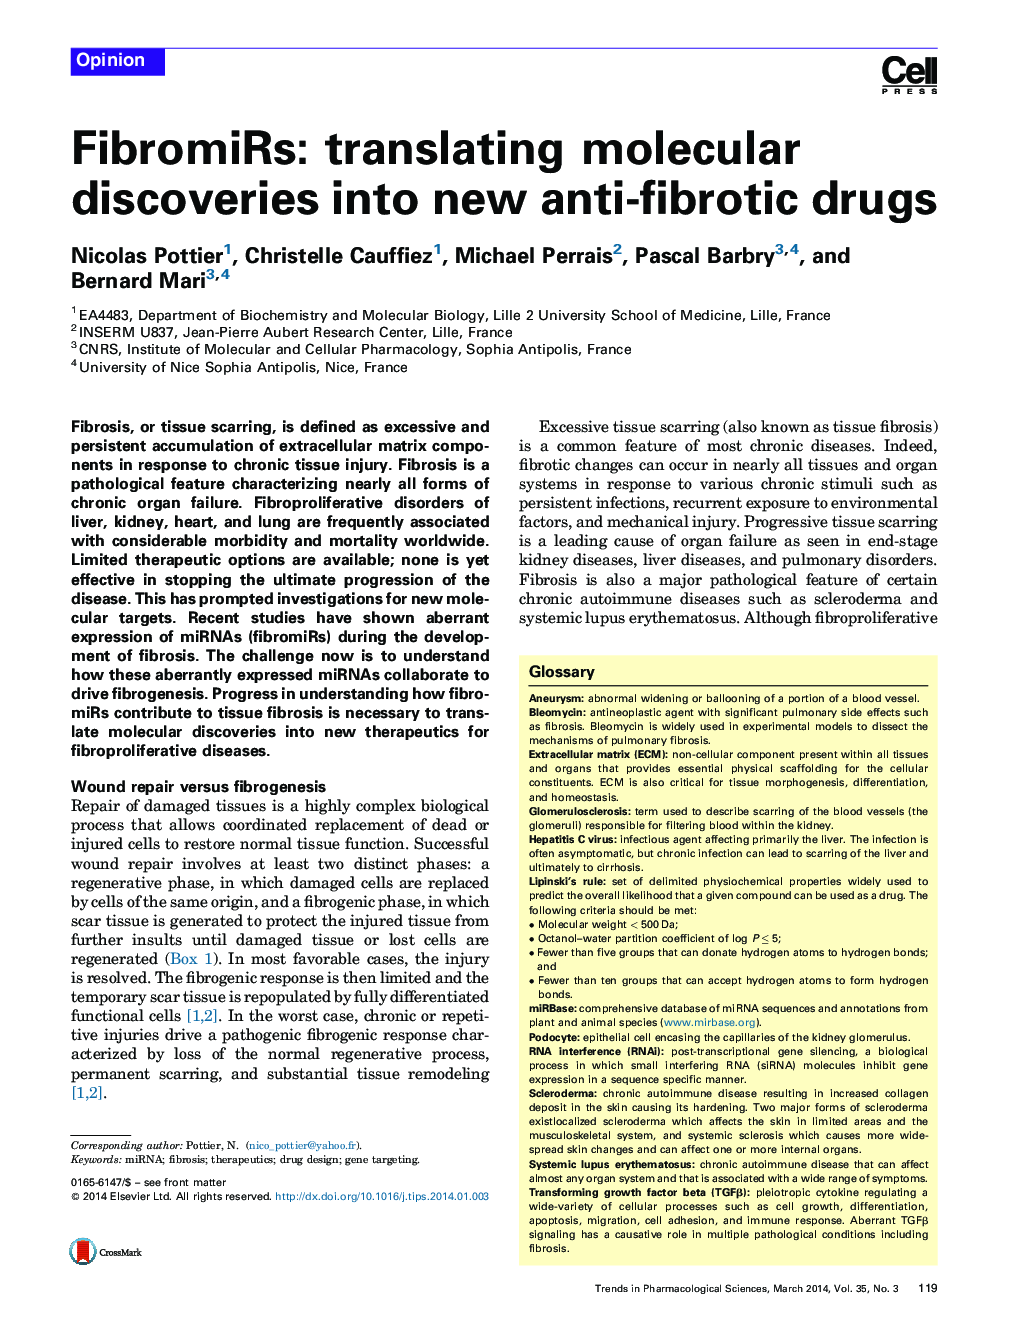 FibromiRs: translating molecular discoveries into new anti-fibrotic drugs